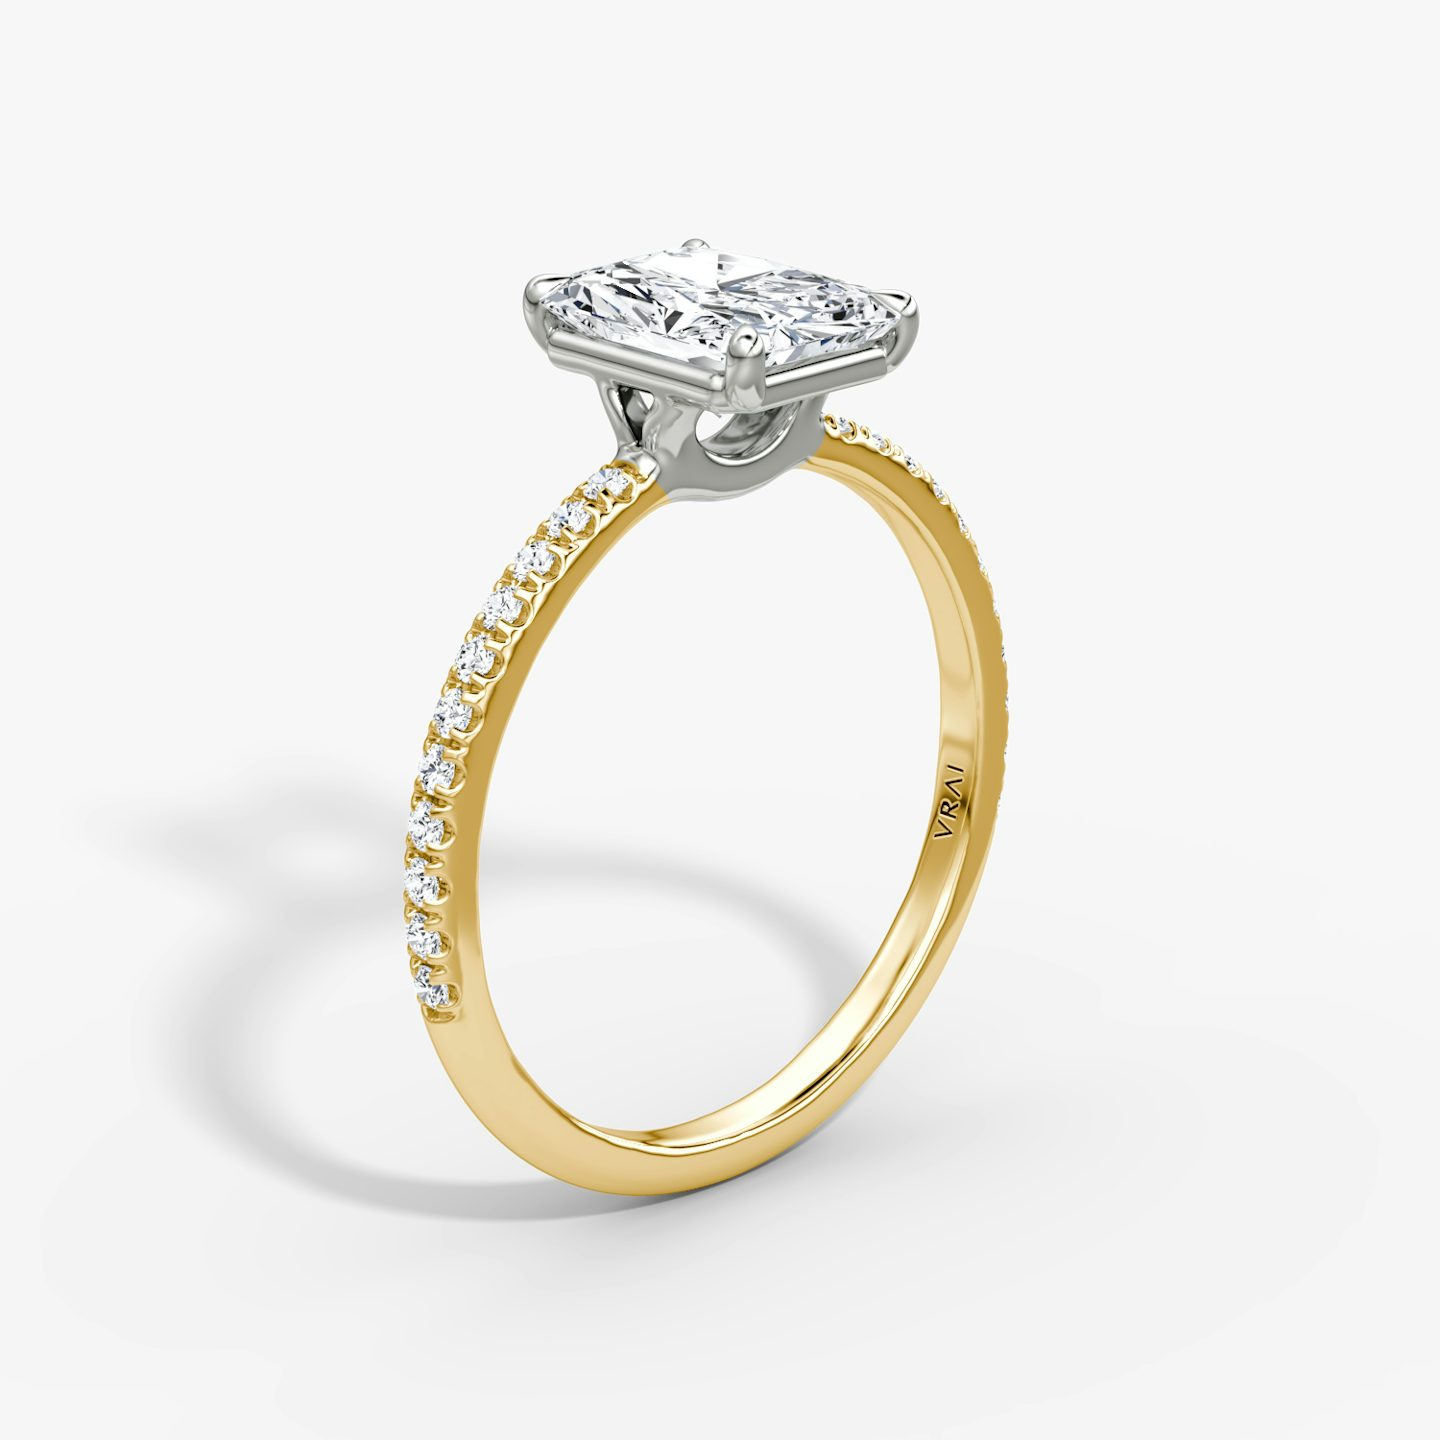 The Signature | Radiant | 18k | 18k Yellow Gold and Platinum | Band: Pavé | Band width: Standard | Setting style: Plain | Diamond orientation: vertical | Carat weight: See full inventory